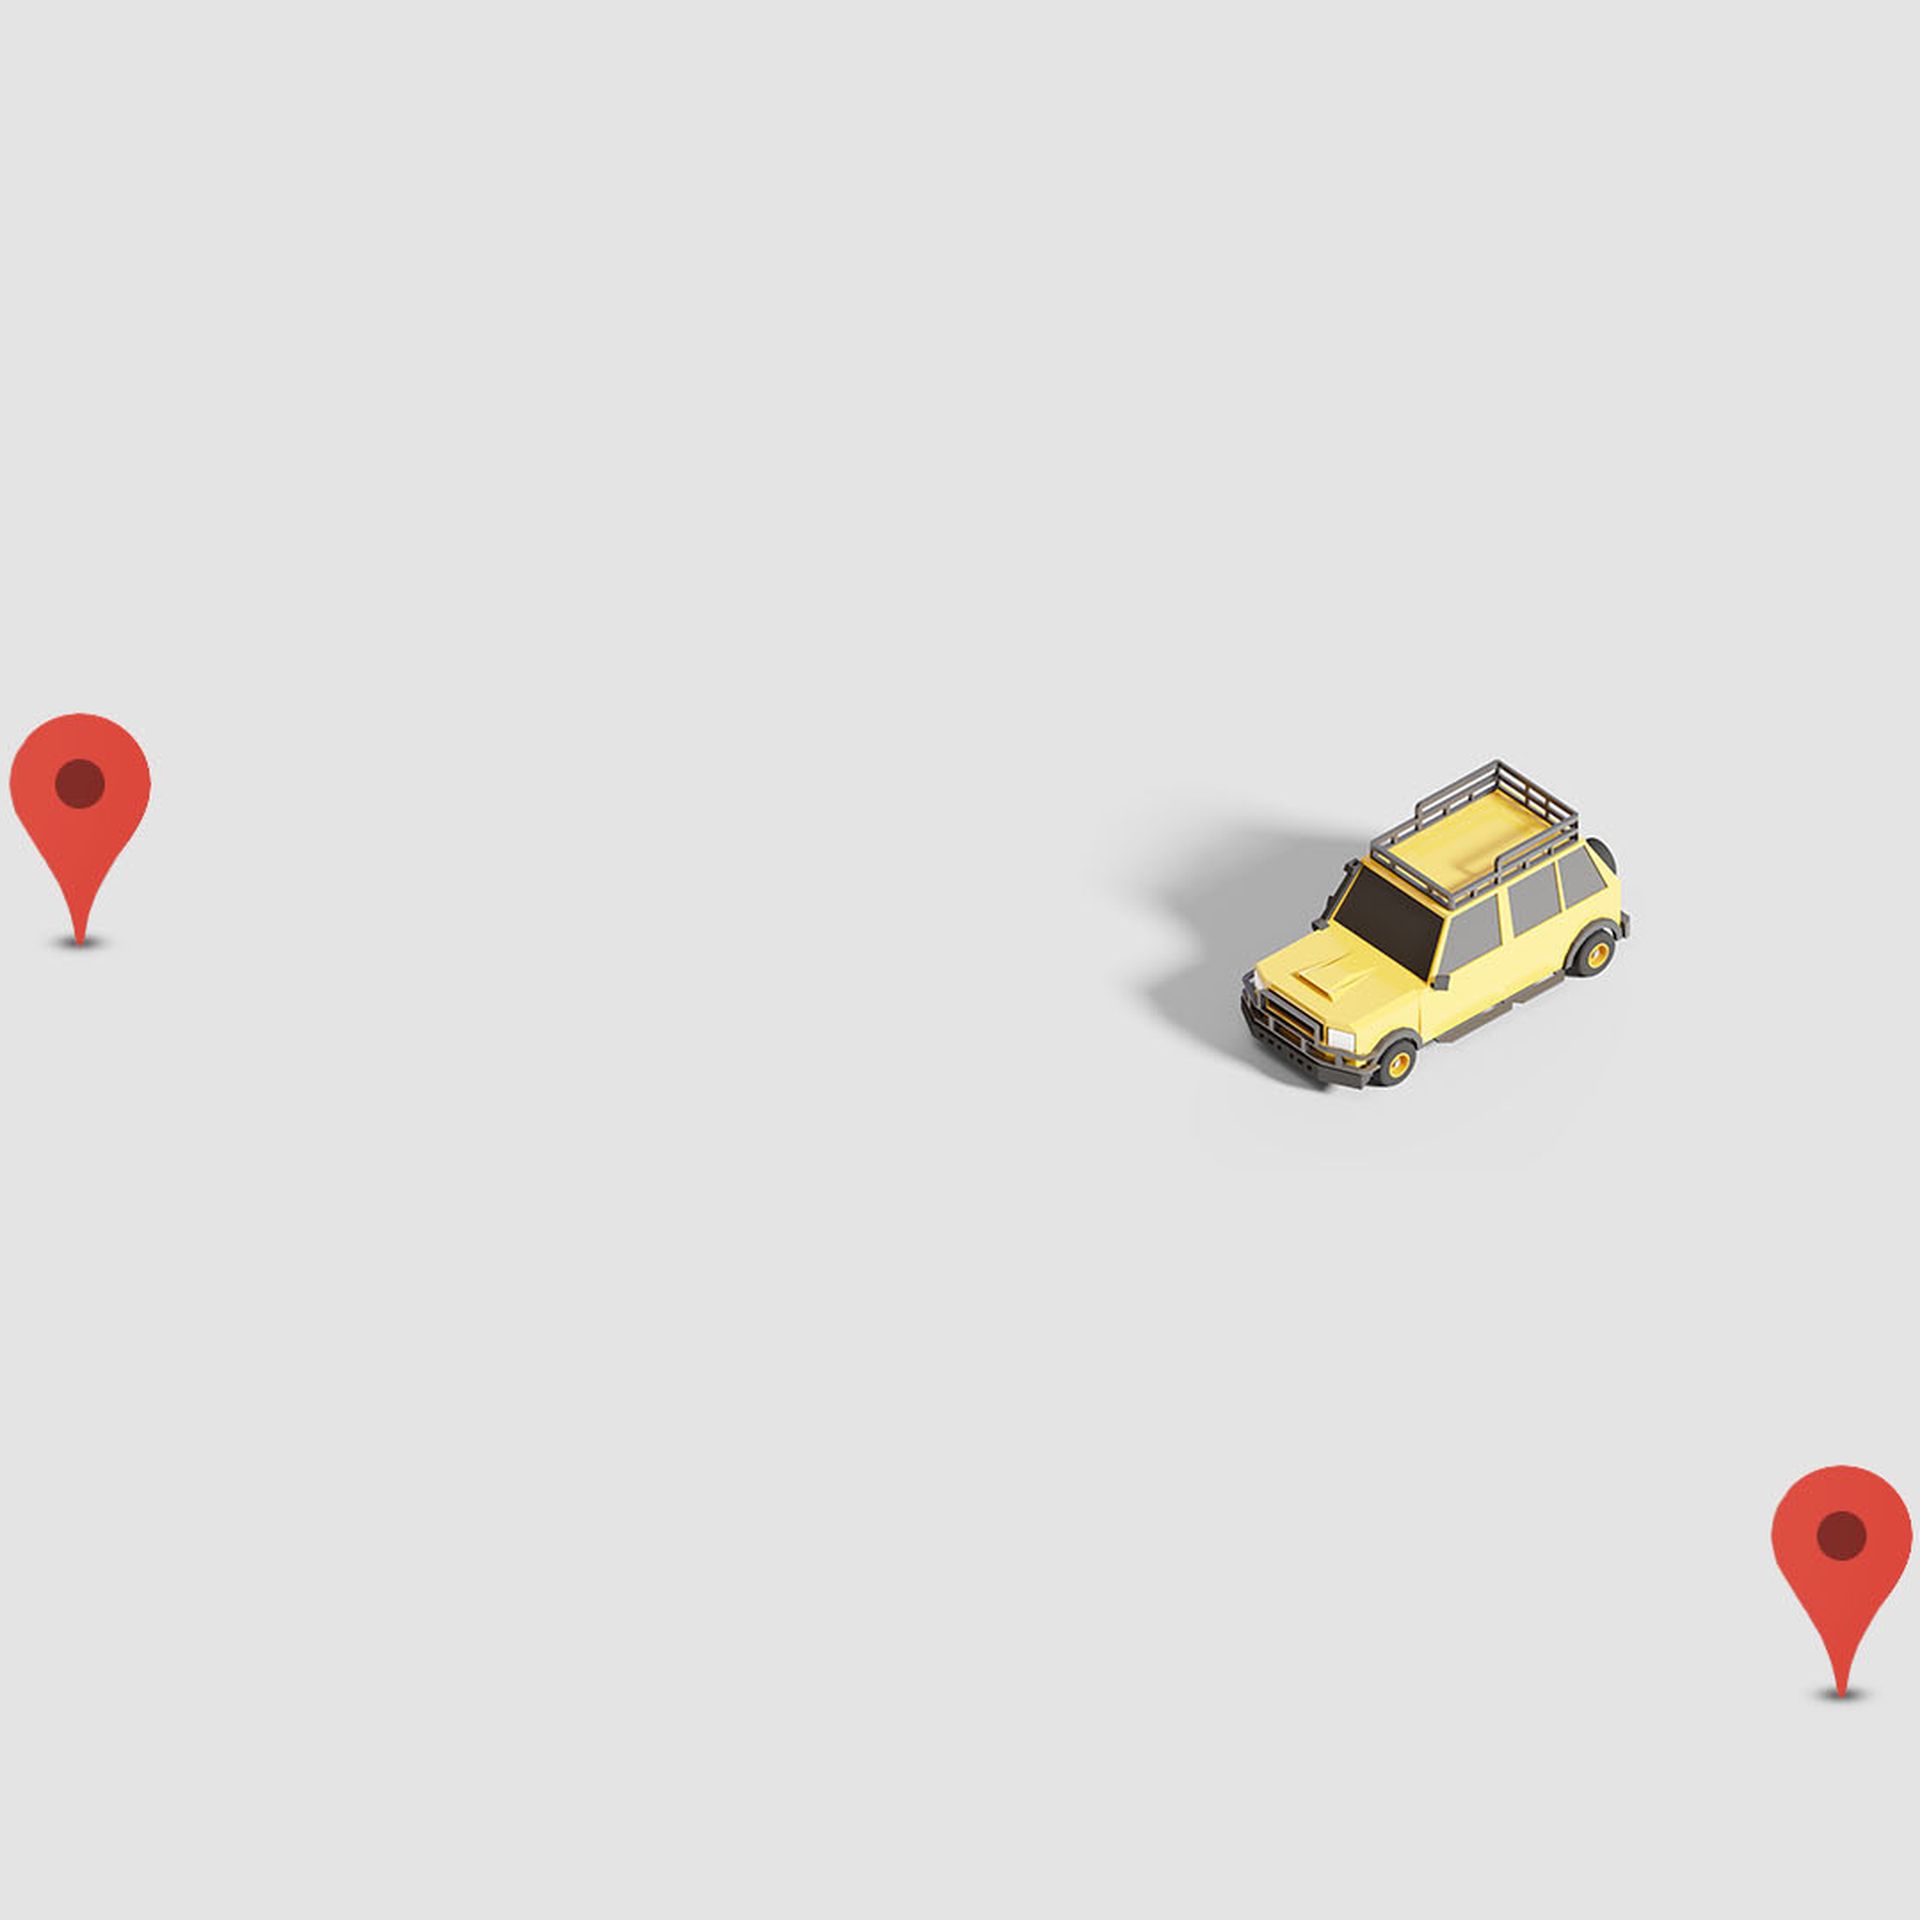 Illustration of a car on a blank map